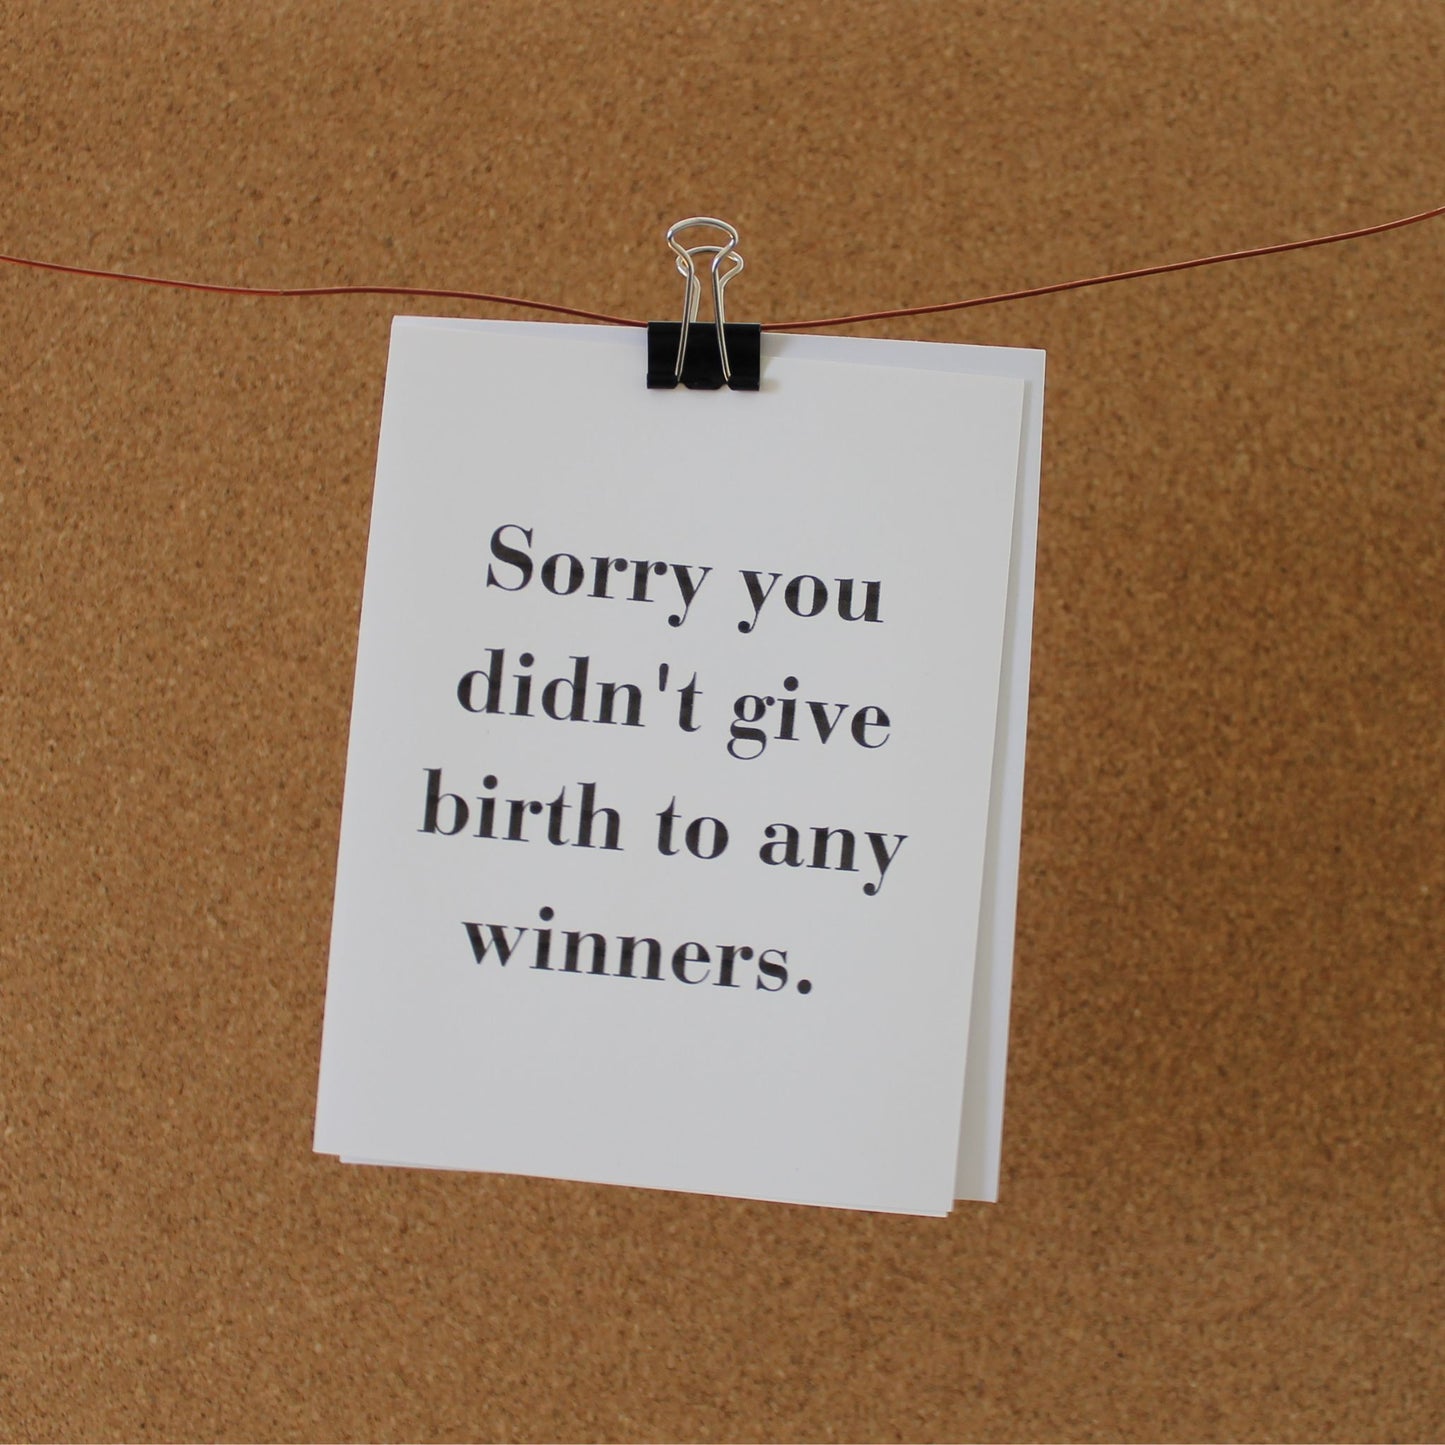 Funny Mother's Day Card: "Sorry you didn't give birth to any winners"